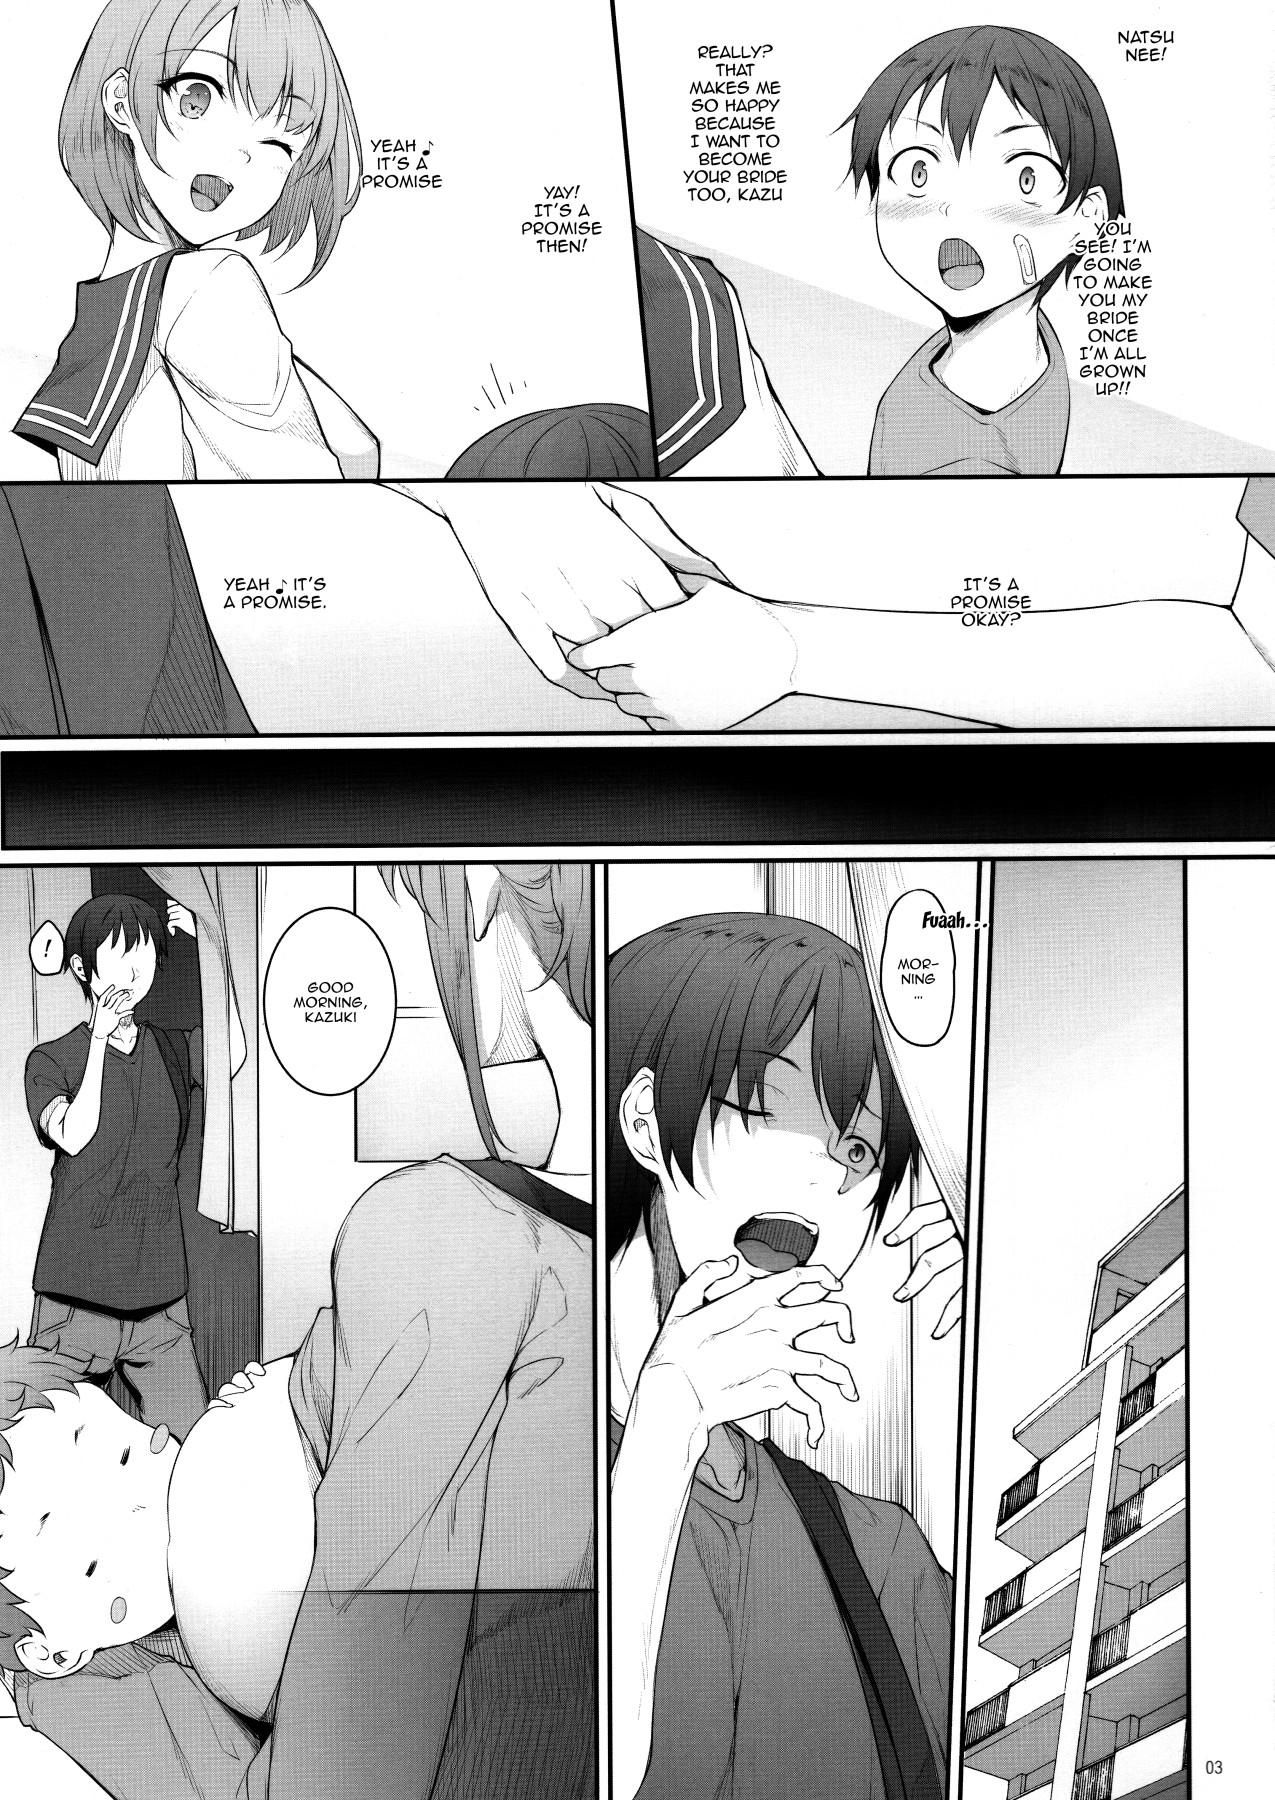 American Ane o Netotta Hi | The Day I Did NTR With My Older Sister - Original Rica - Page 2